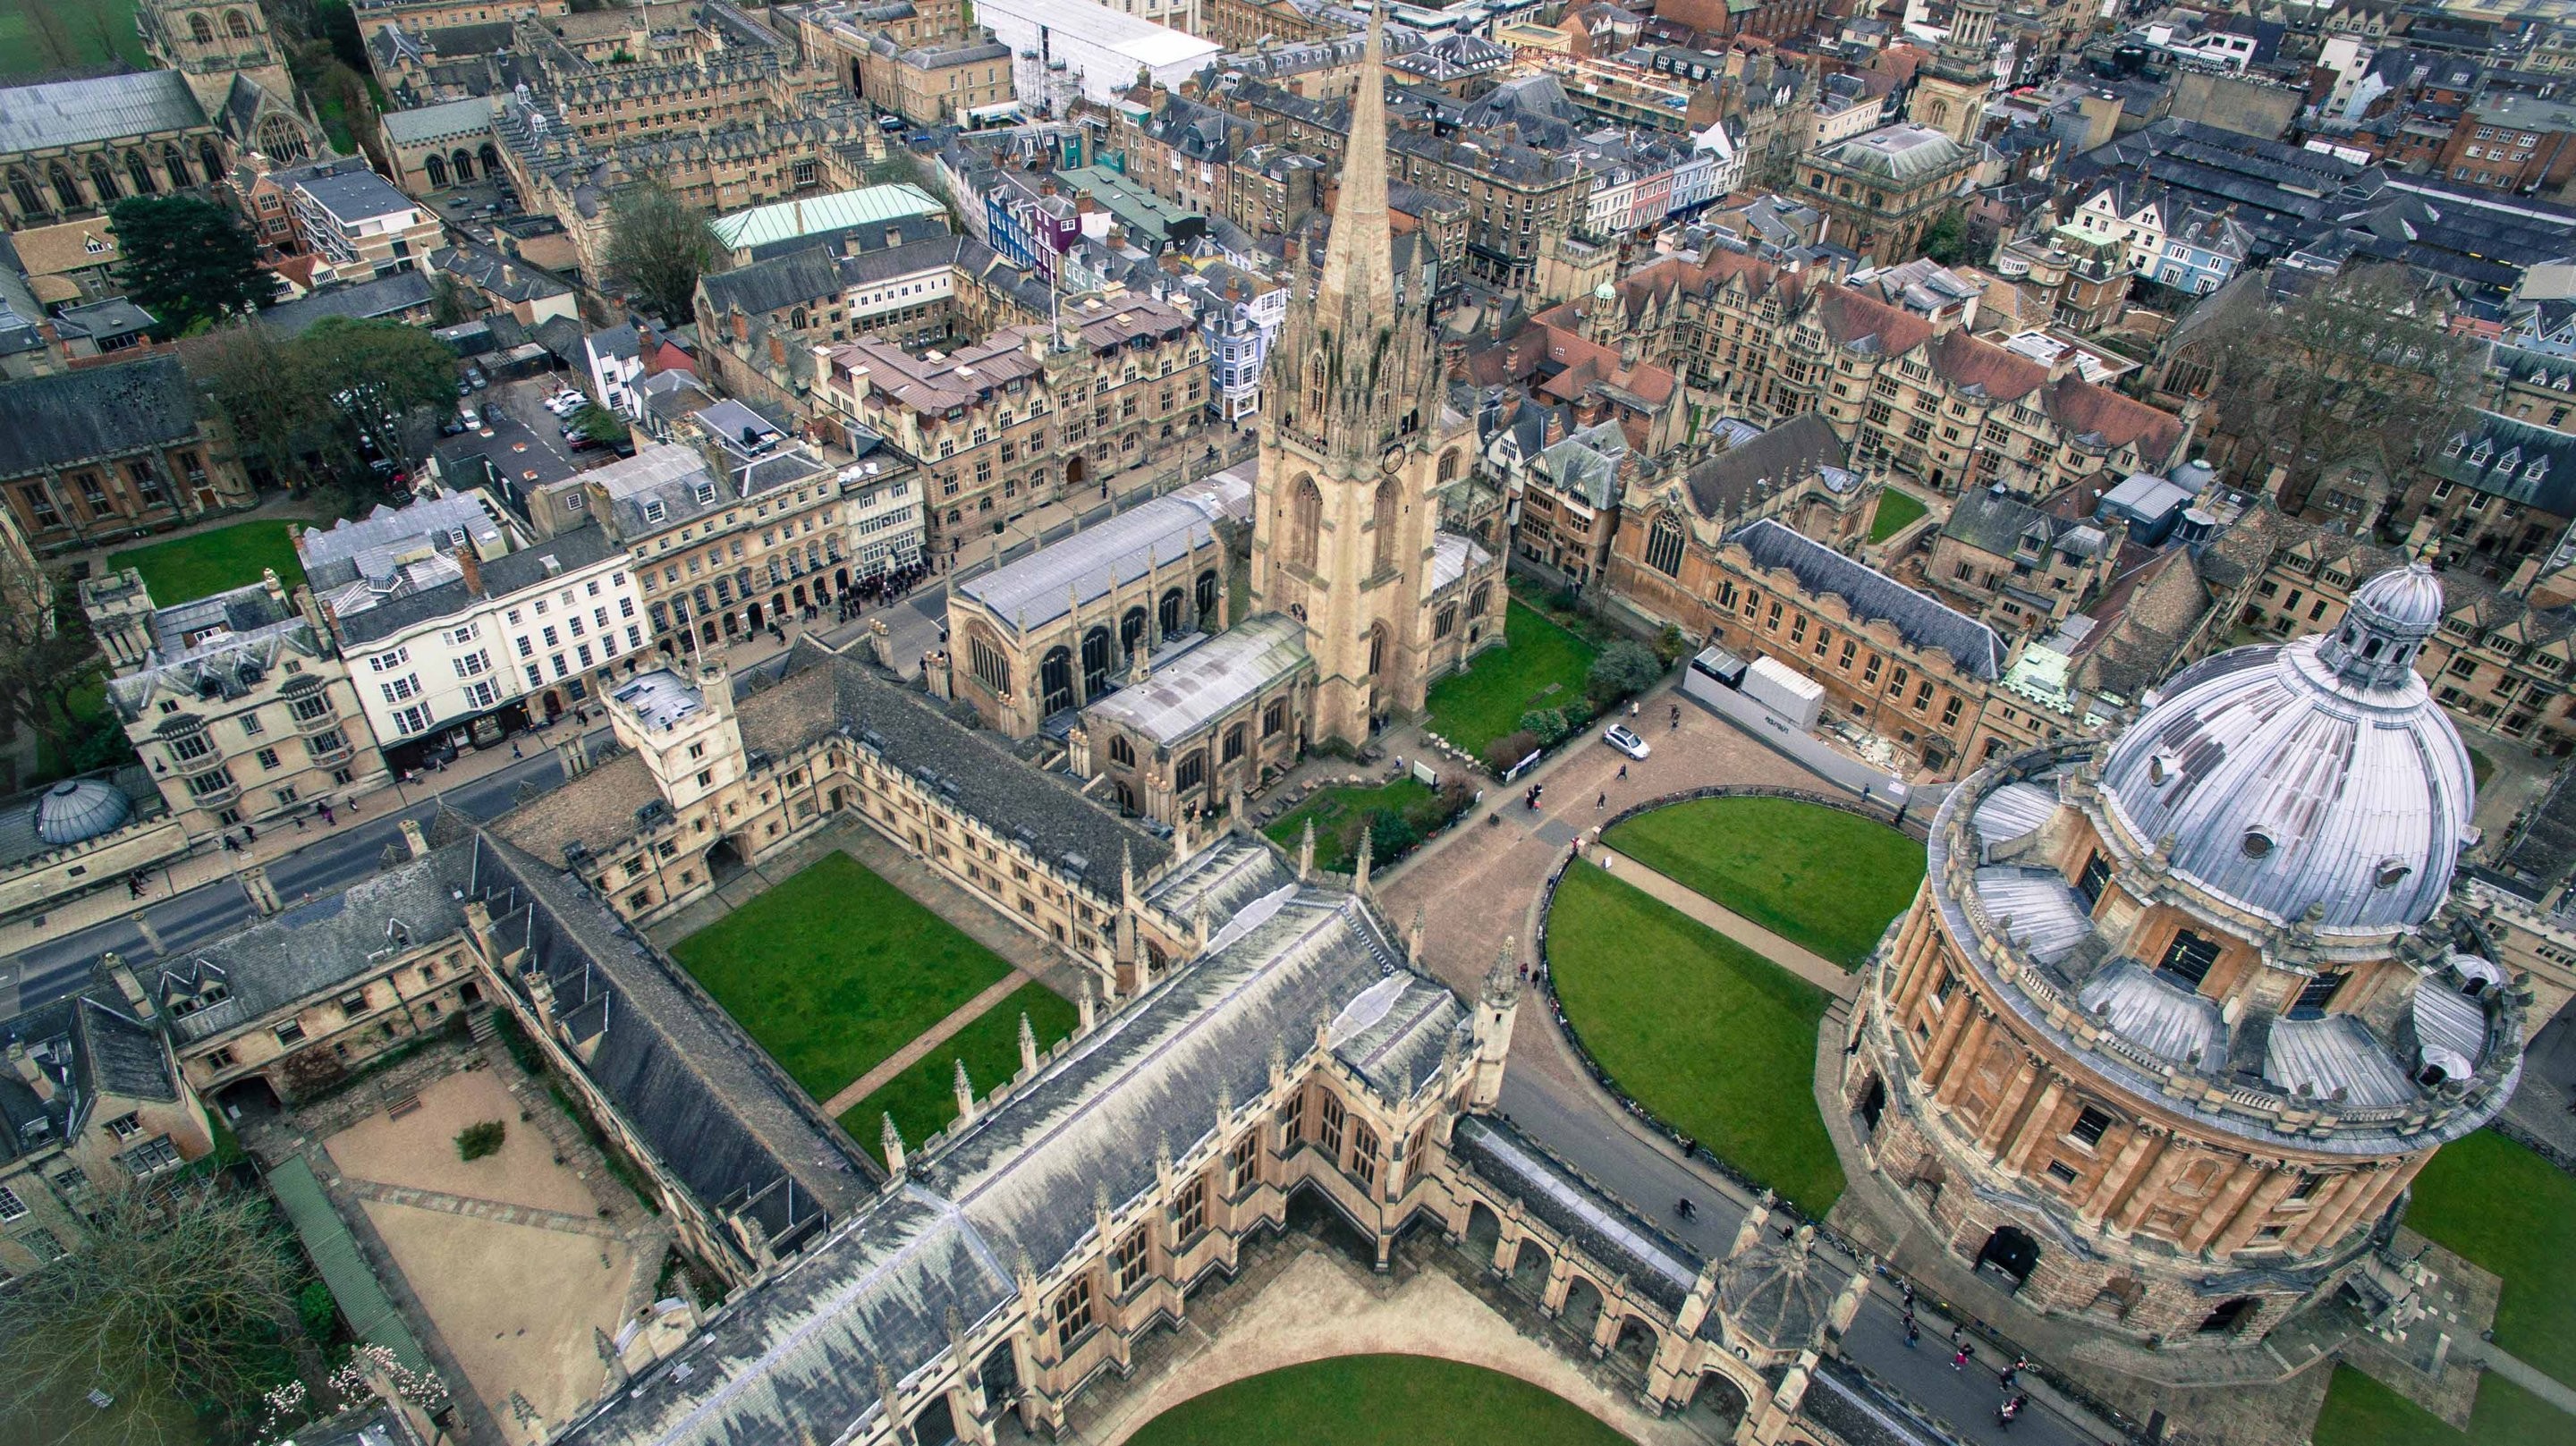 An aerial view of Oxford University's Radcliffe Square showing the dome and steeple structures and other campus buildings